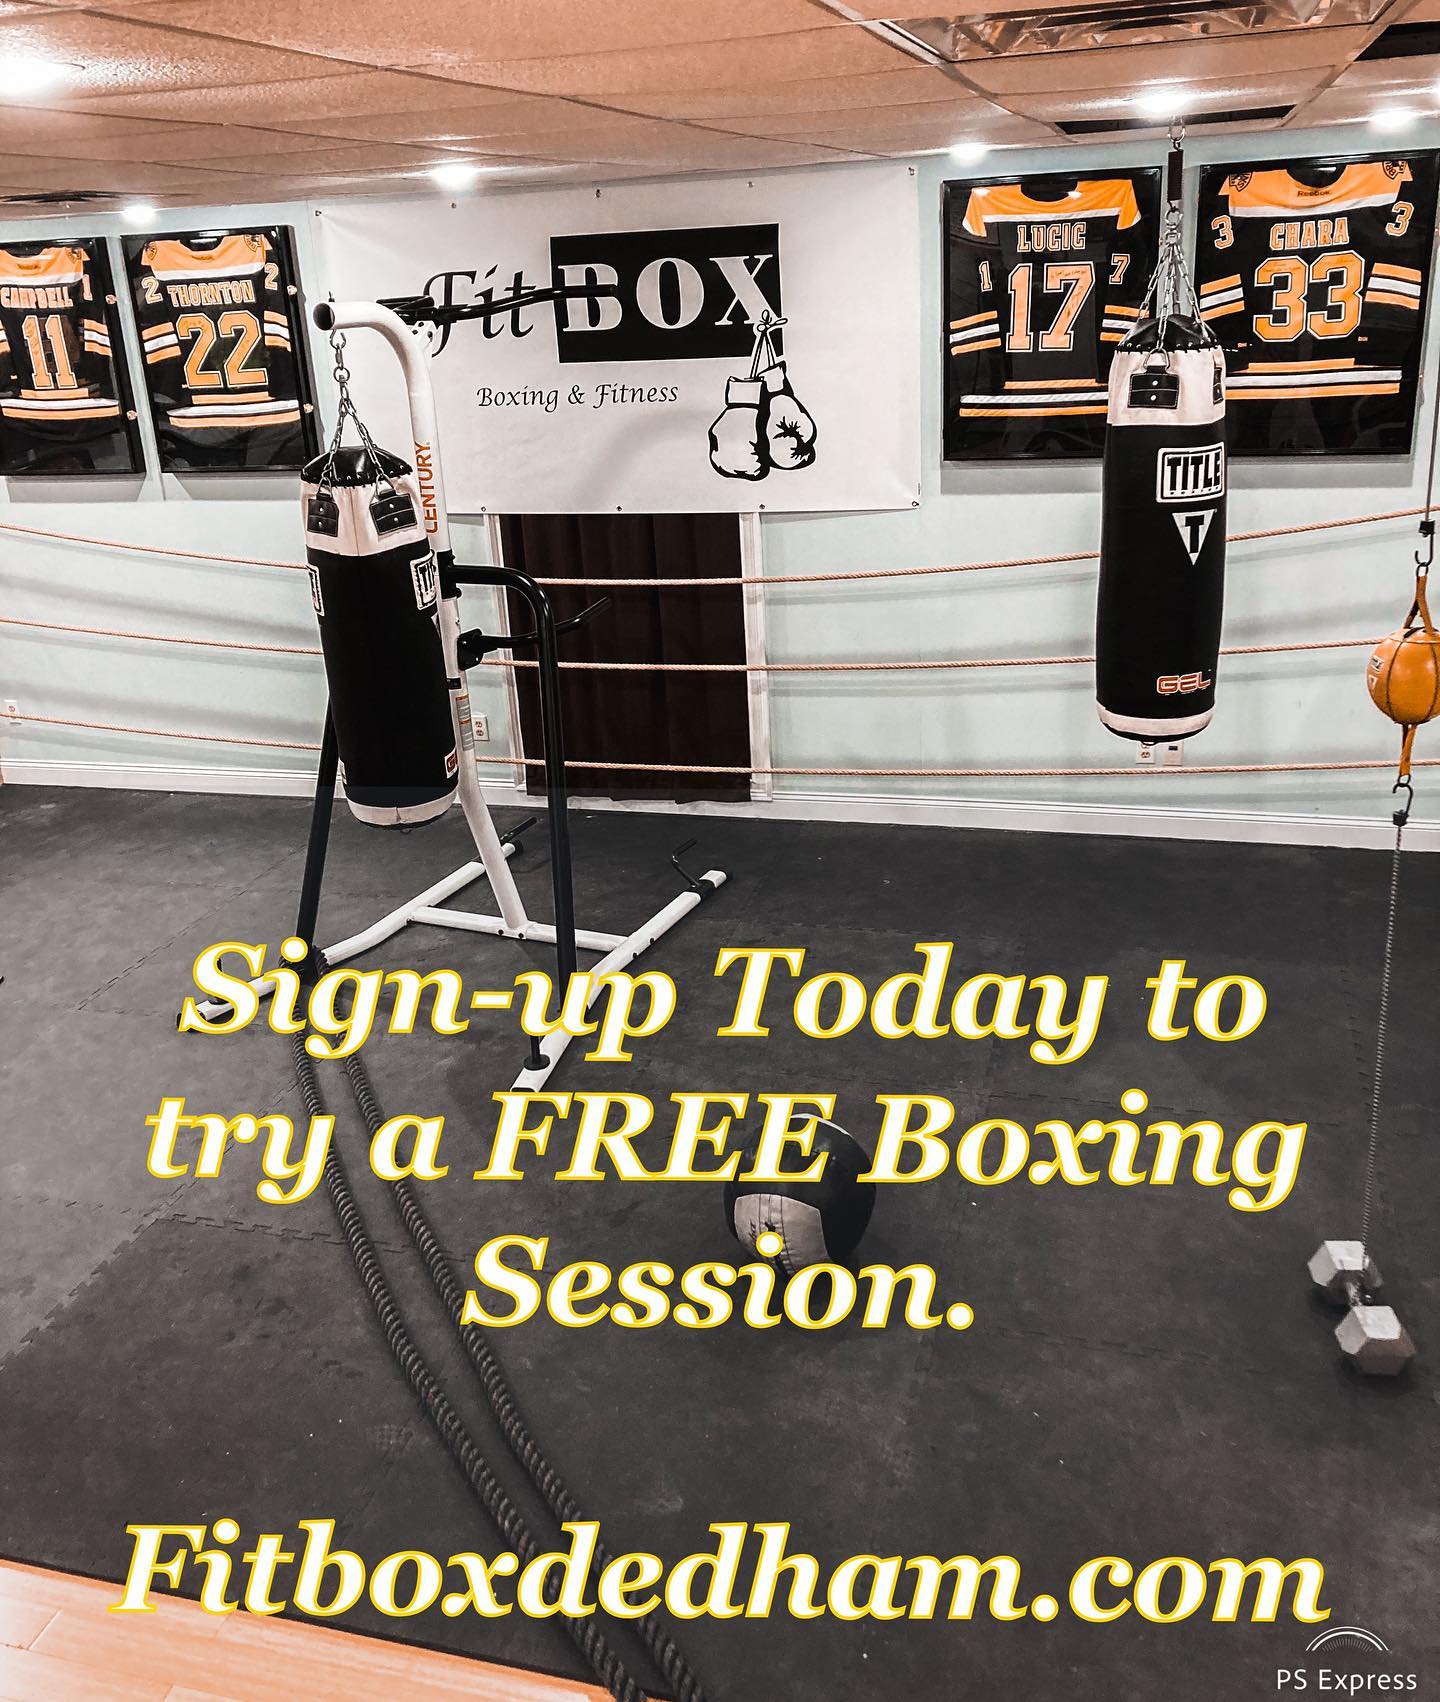 No Excuses Now !! We are offering a FREE 1-on-1 Boxing Workout for you to come in and try it out. For more info you can contact us at call/text (781)727-9503 or email fitbox@outlook.com .